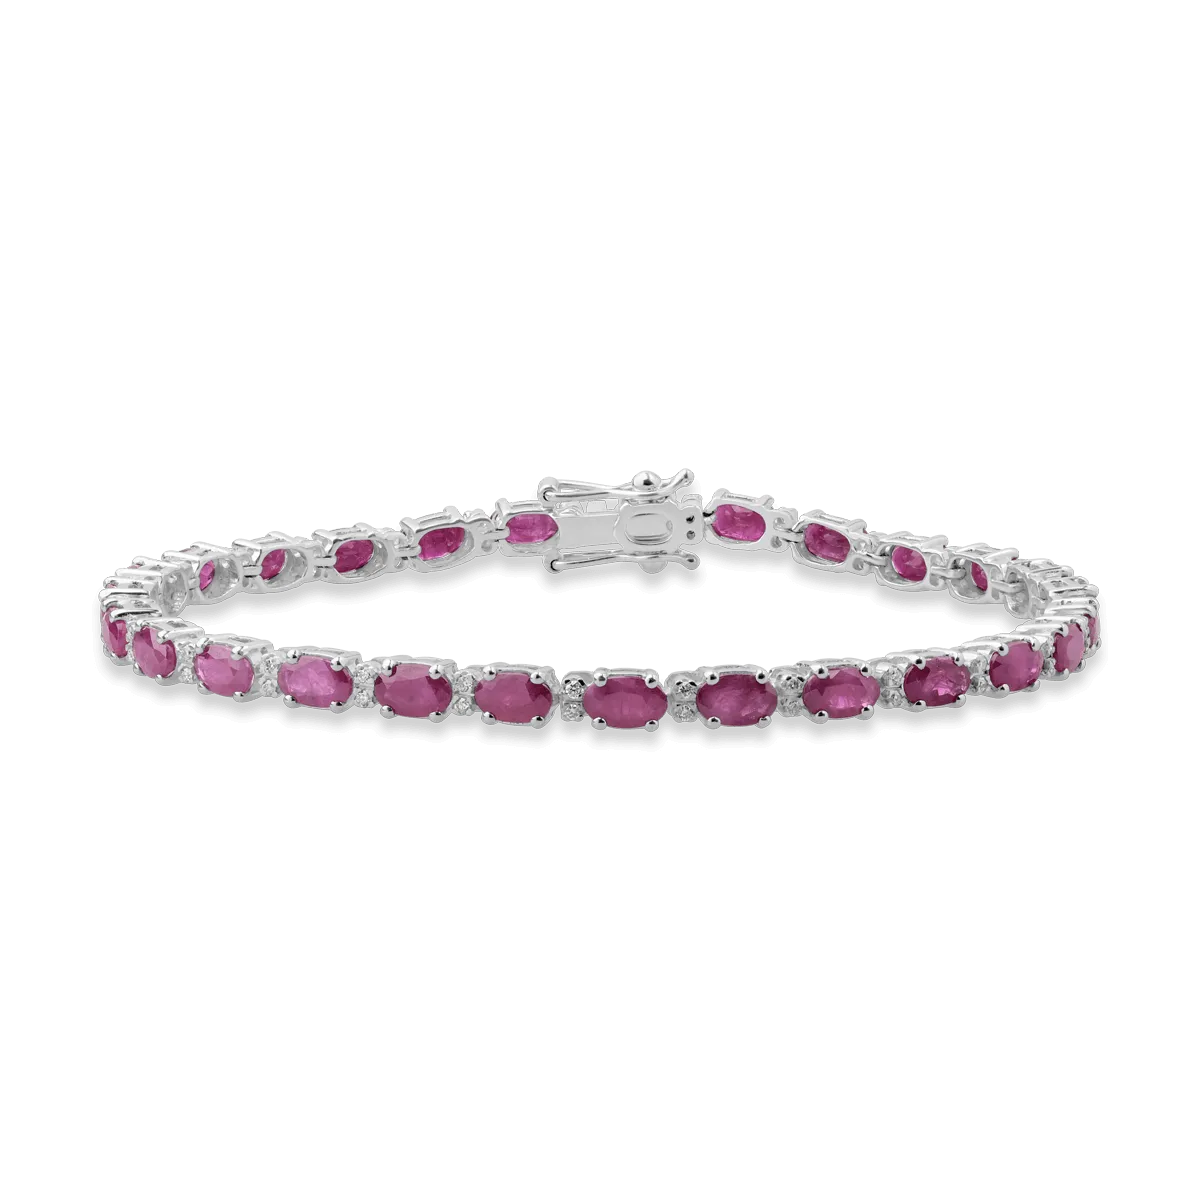 18K white gold tennis bracelet with 8.53ct rubies and 0.26ct diamonds